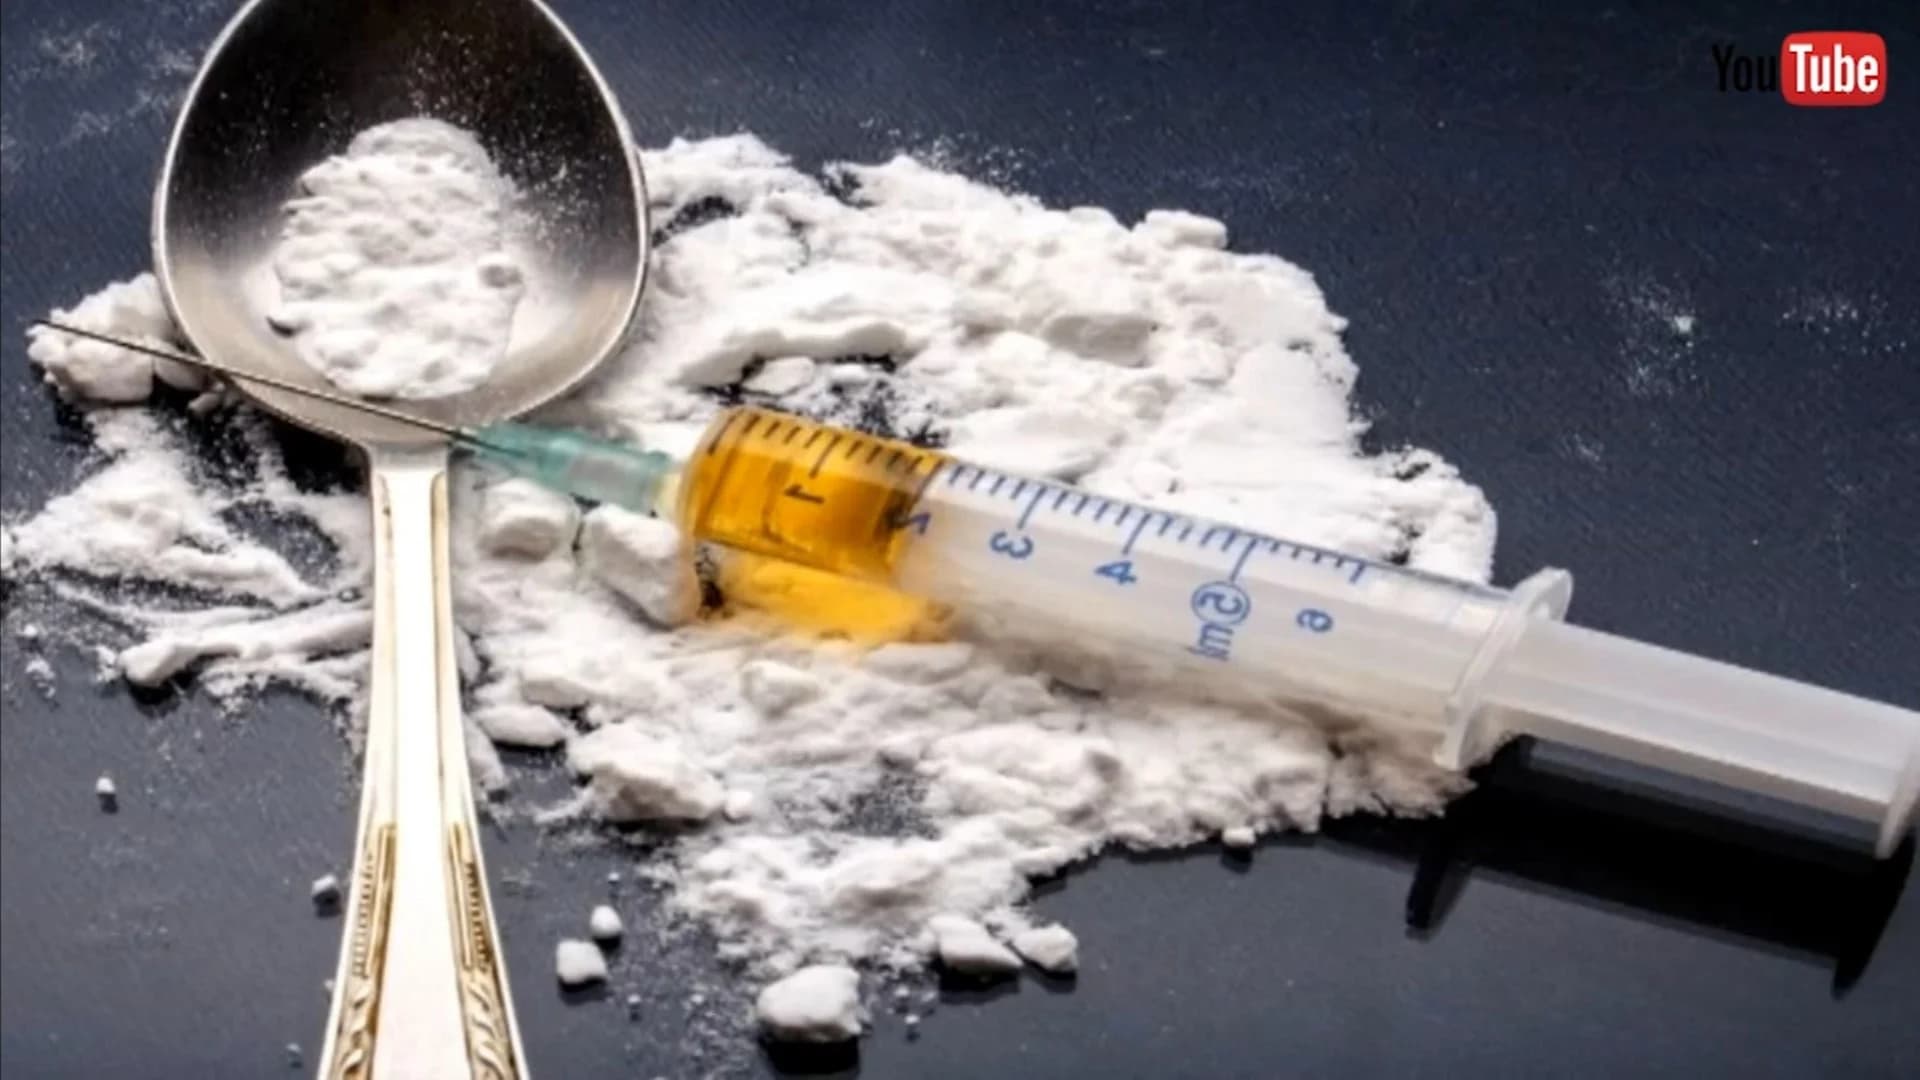 Officials: Norwalk man's April death linked to carfentanil